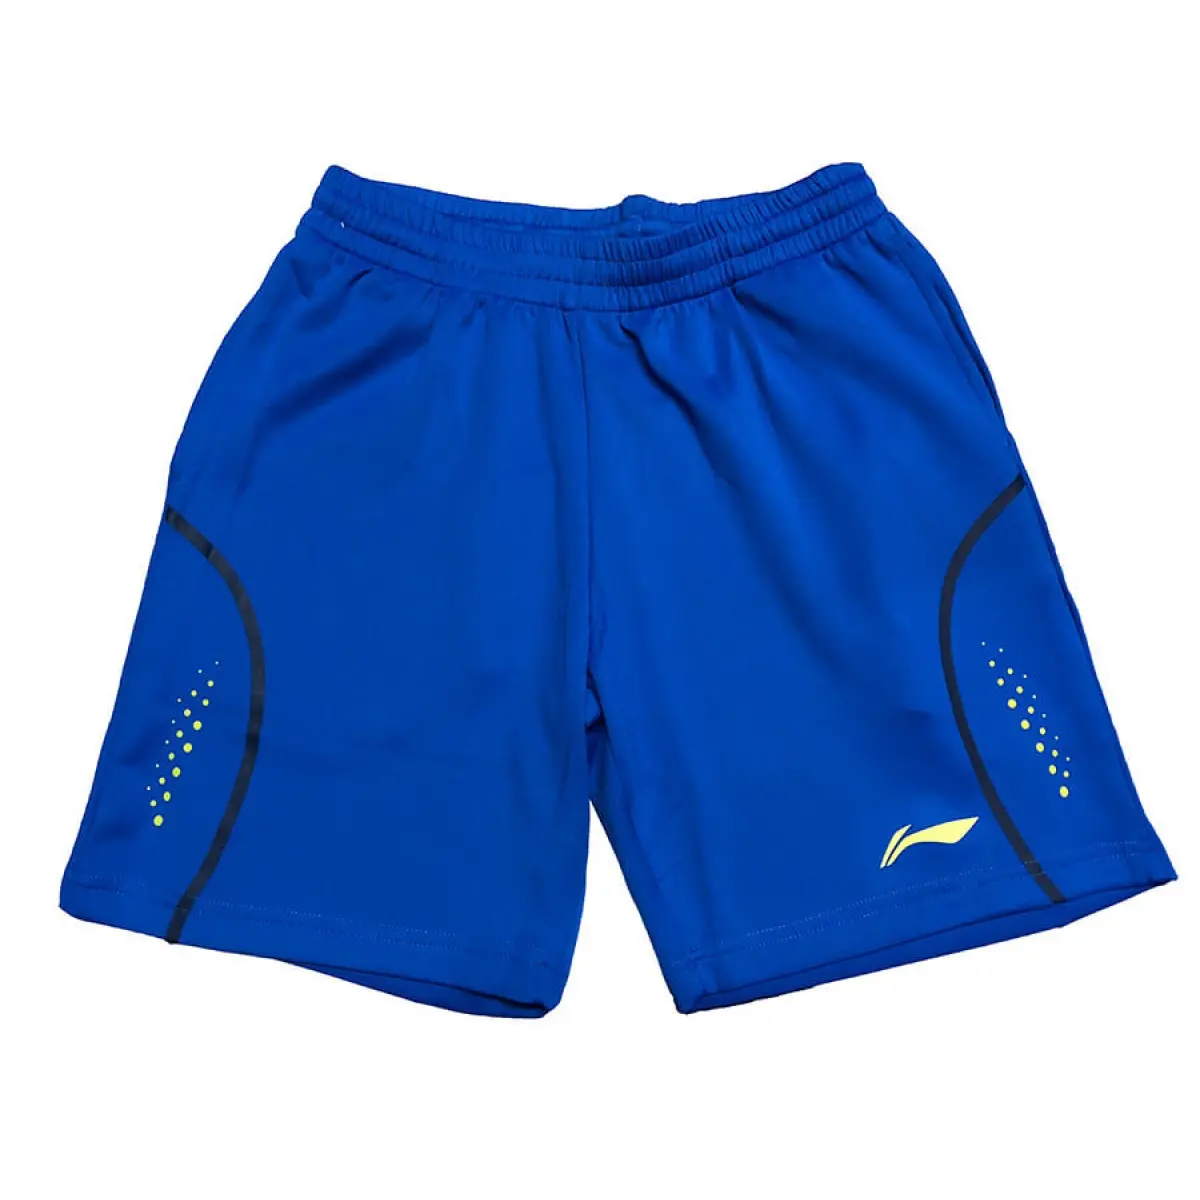 Buy Lining Moisture Management Mens Shorts at Lowest Prices